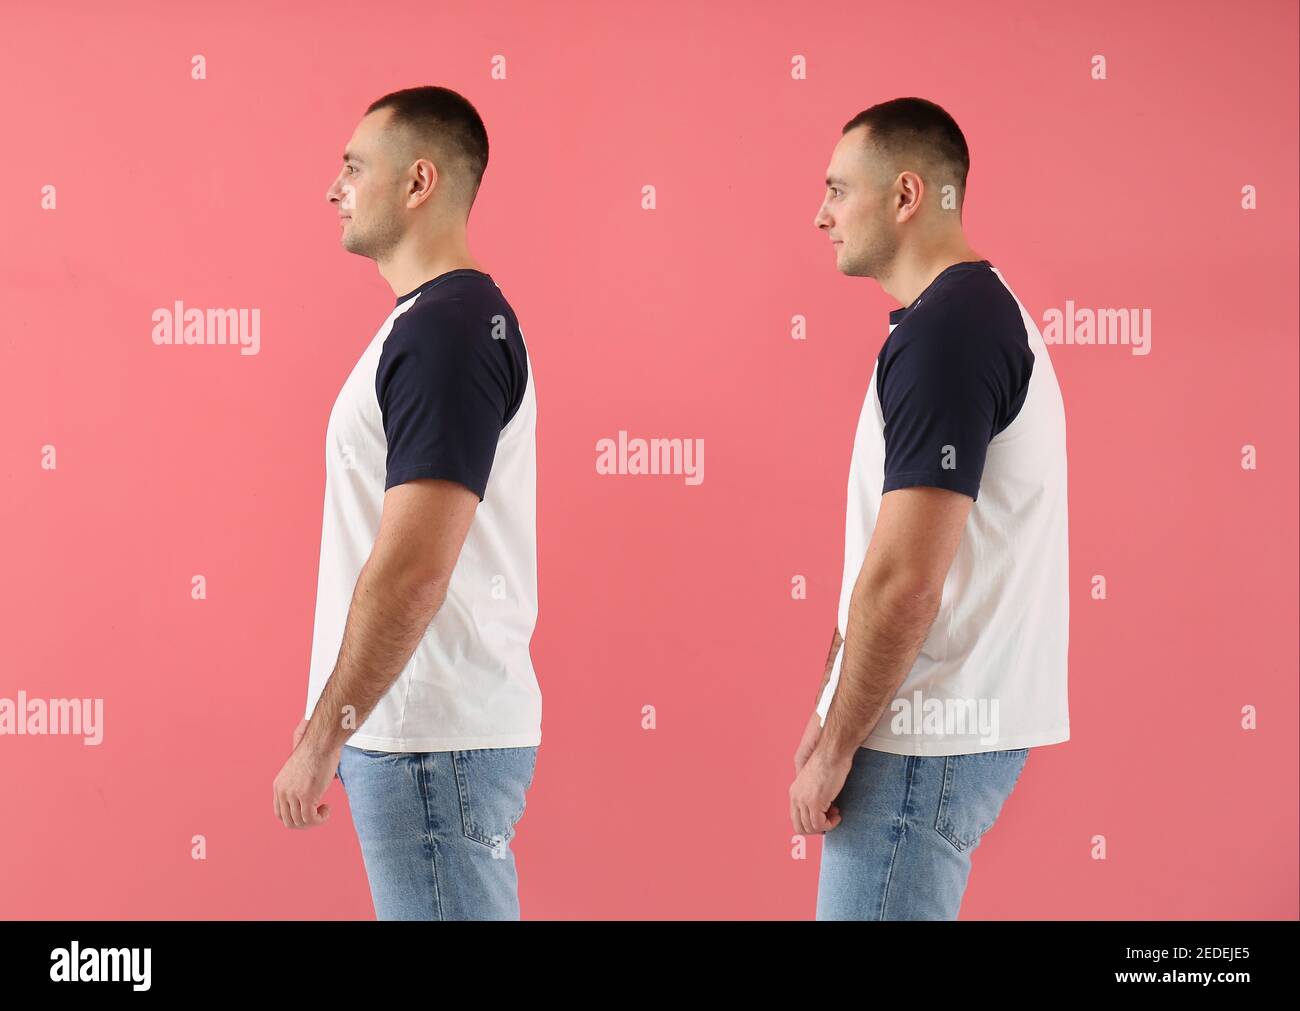 Man with proper and bad posture on color background Stock Photo